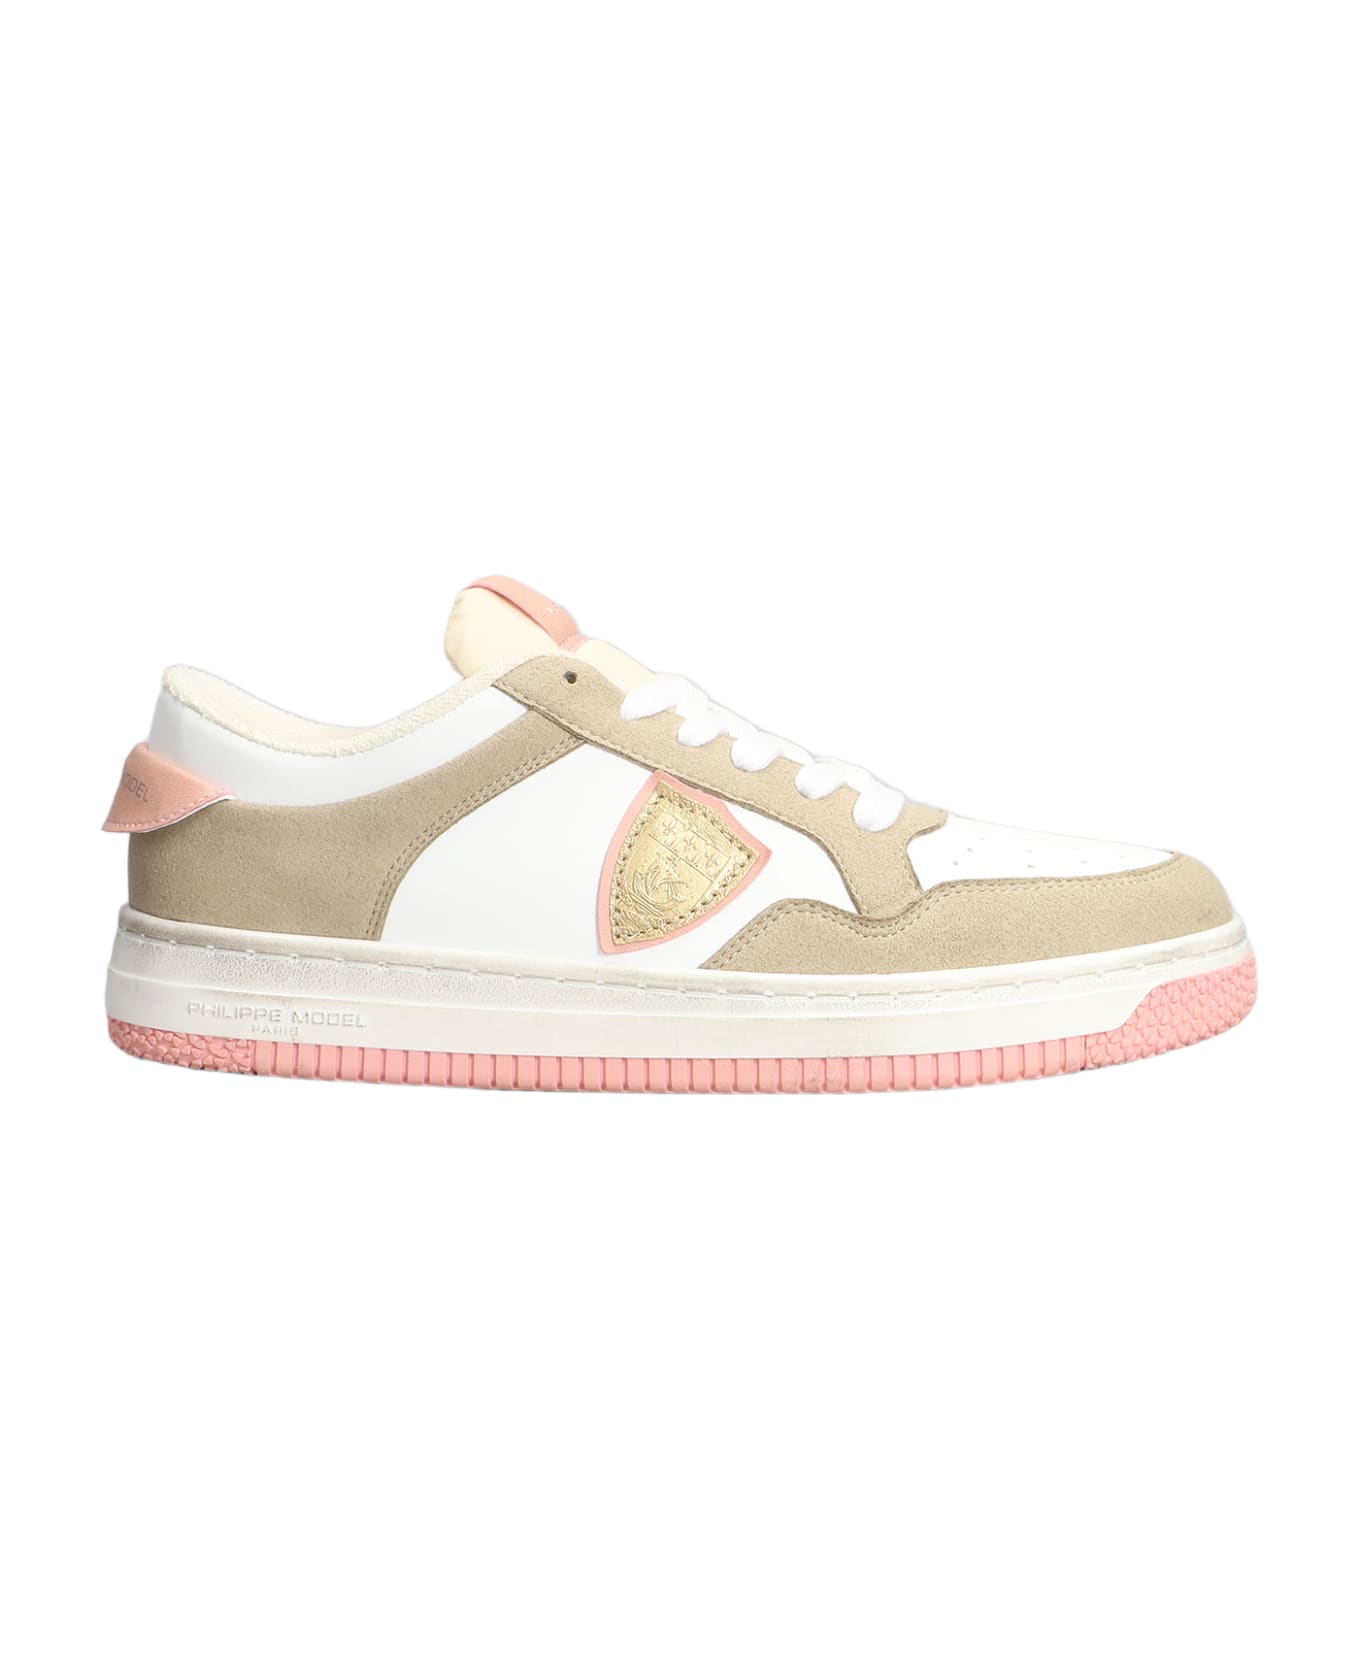 Philippe Model Lyon Sneakers In White Suede And Leather - Blanc/rose